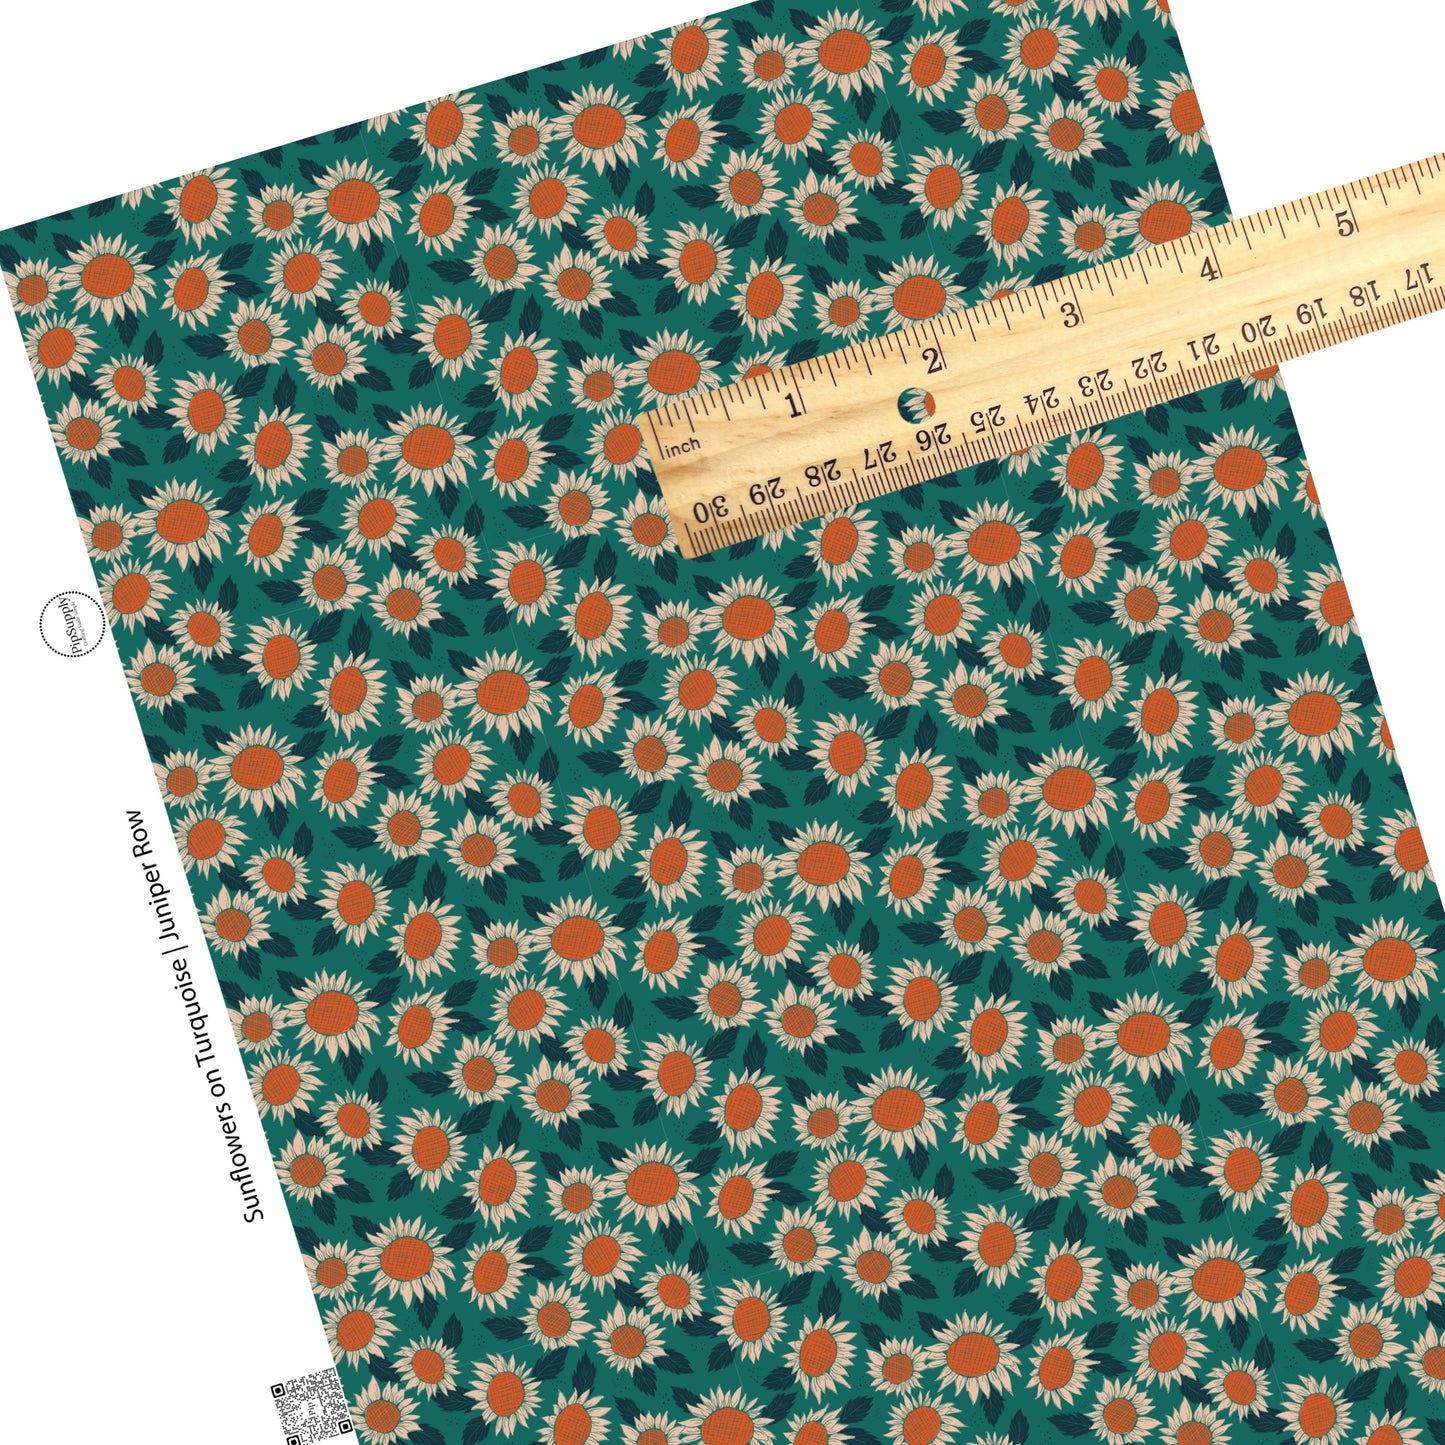 Scattered Sunflowers on turquoise faux leather sheets